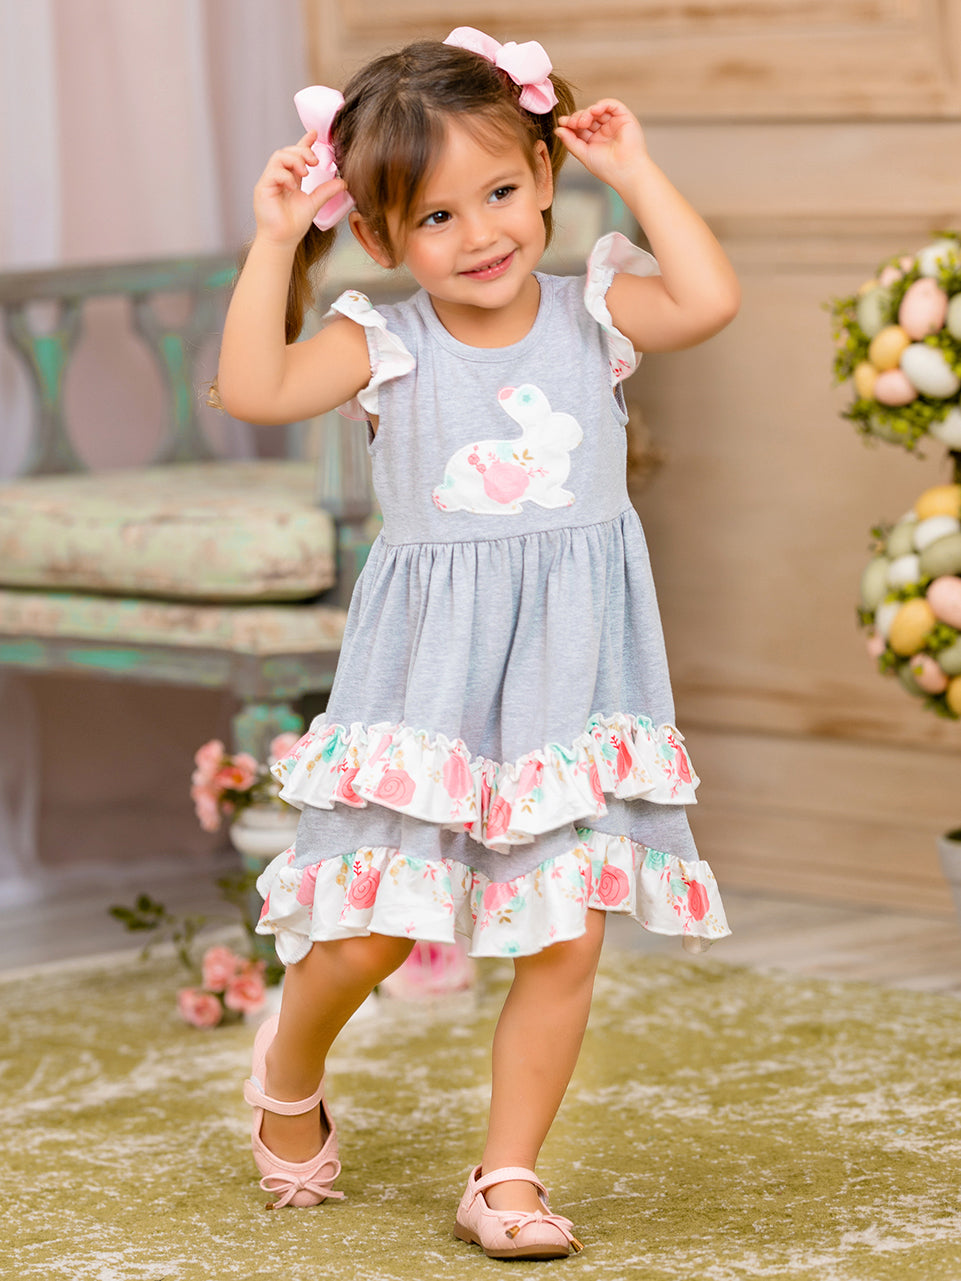 Miss Baby - Dress your little ones in style!